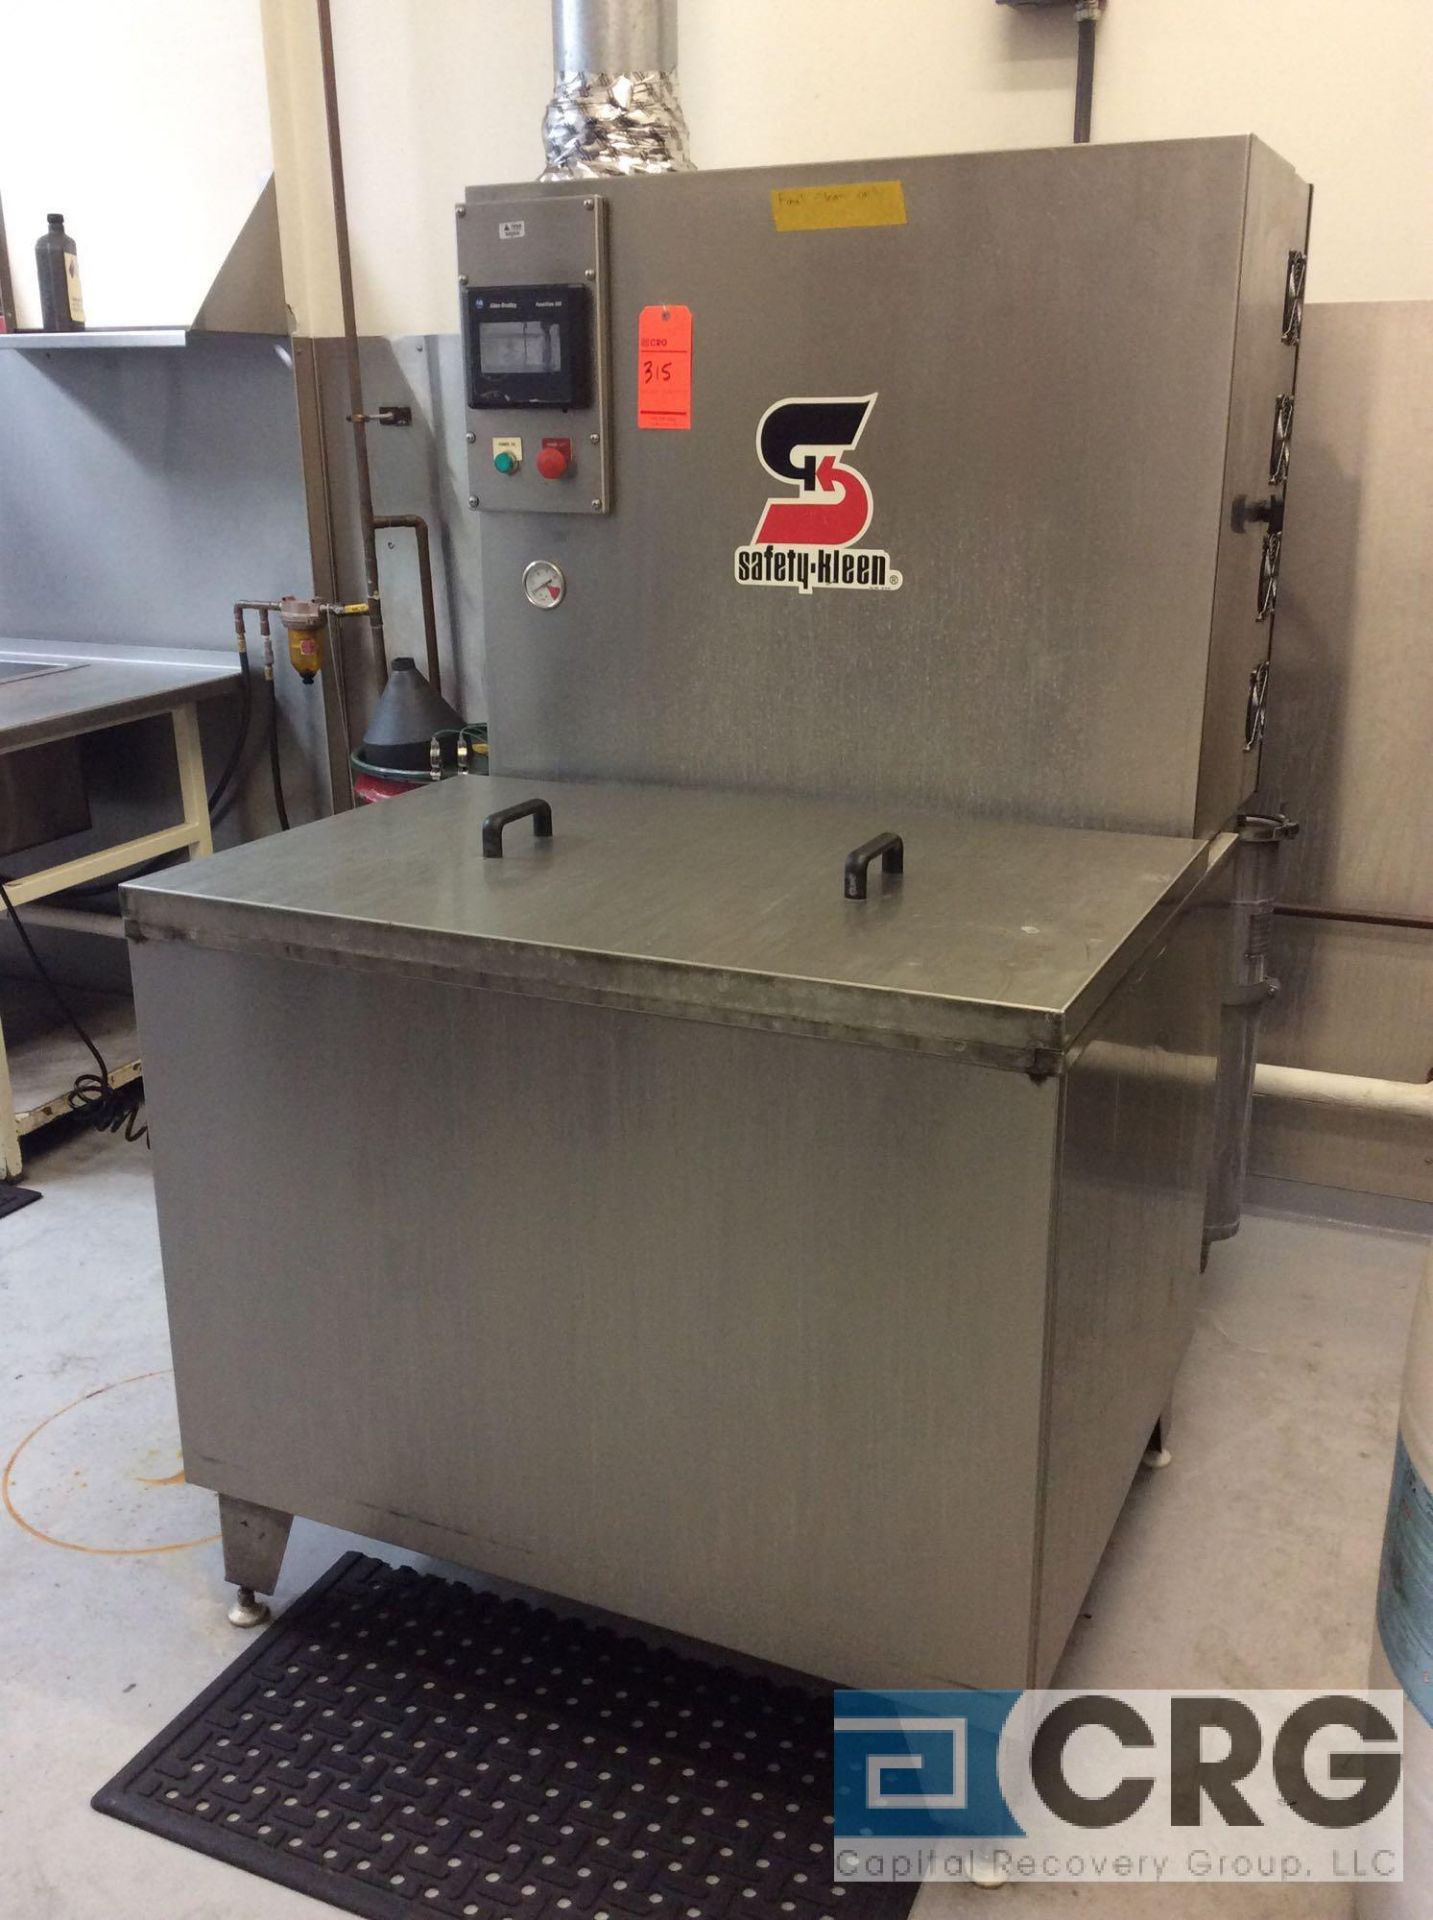 Safety Kleen stainless steel 26" x 42" ultrasonic parts washer with Allen Bradley panel view 550